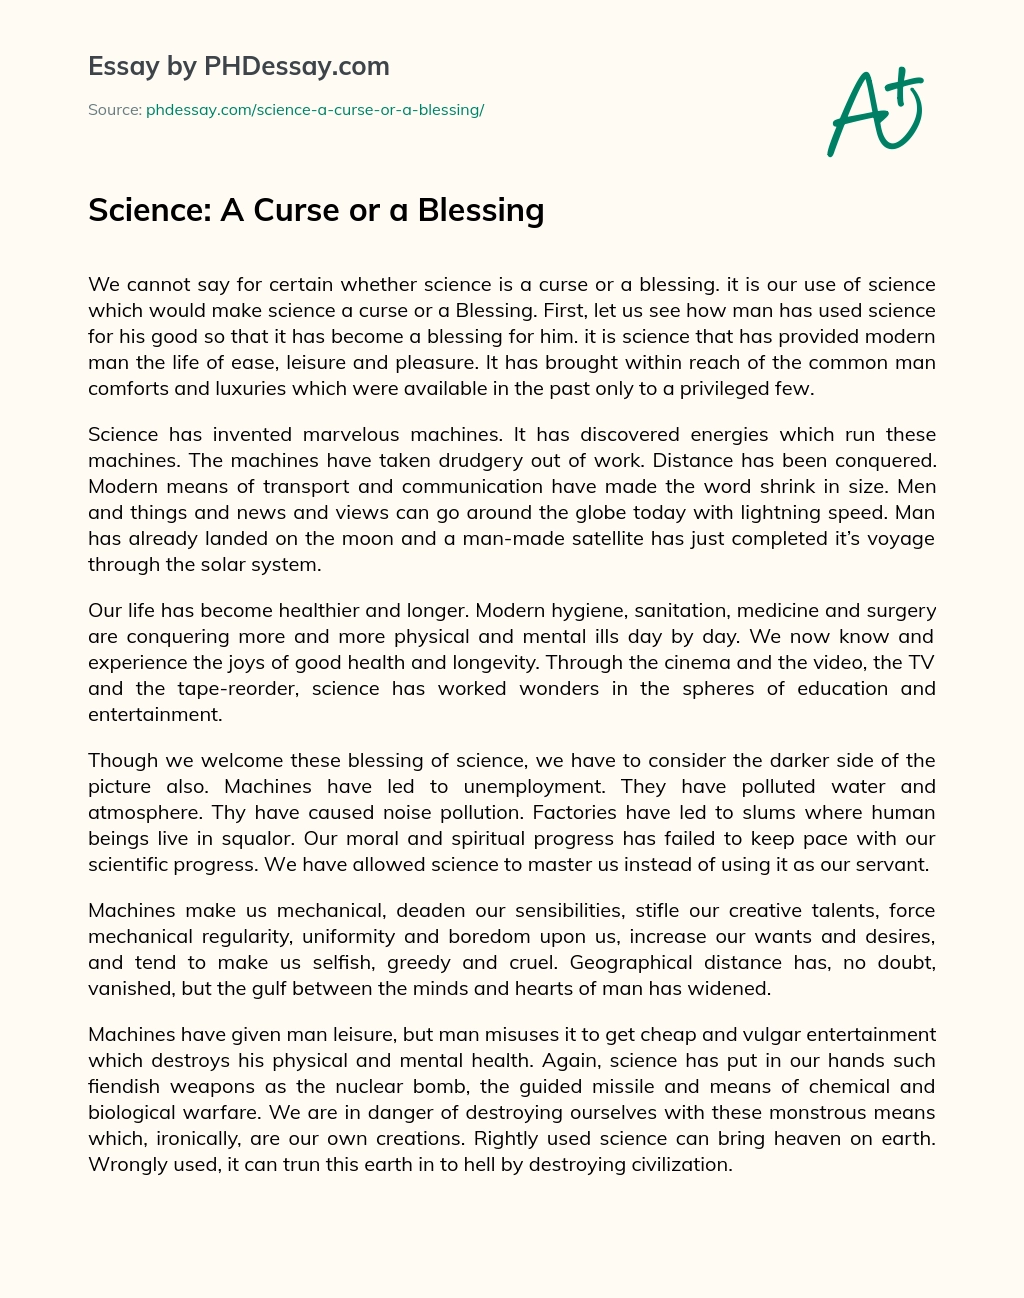 Science: A Curse or a Blessing essay